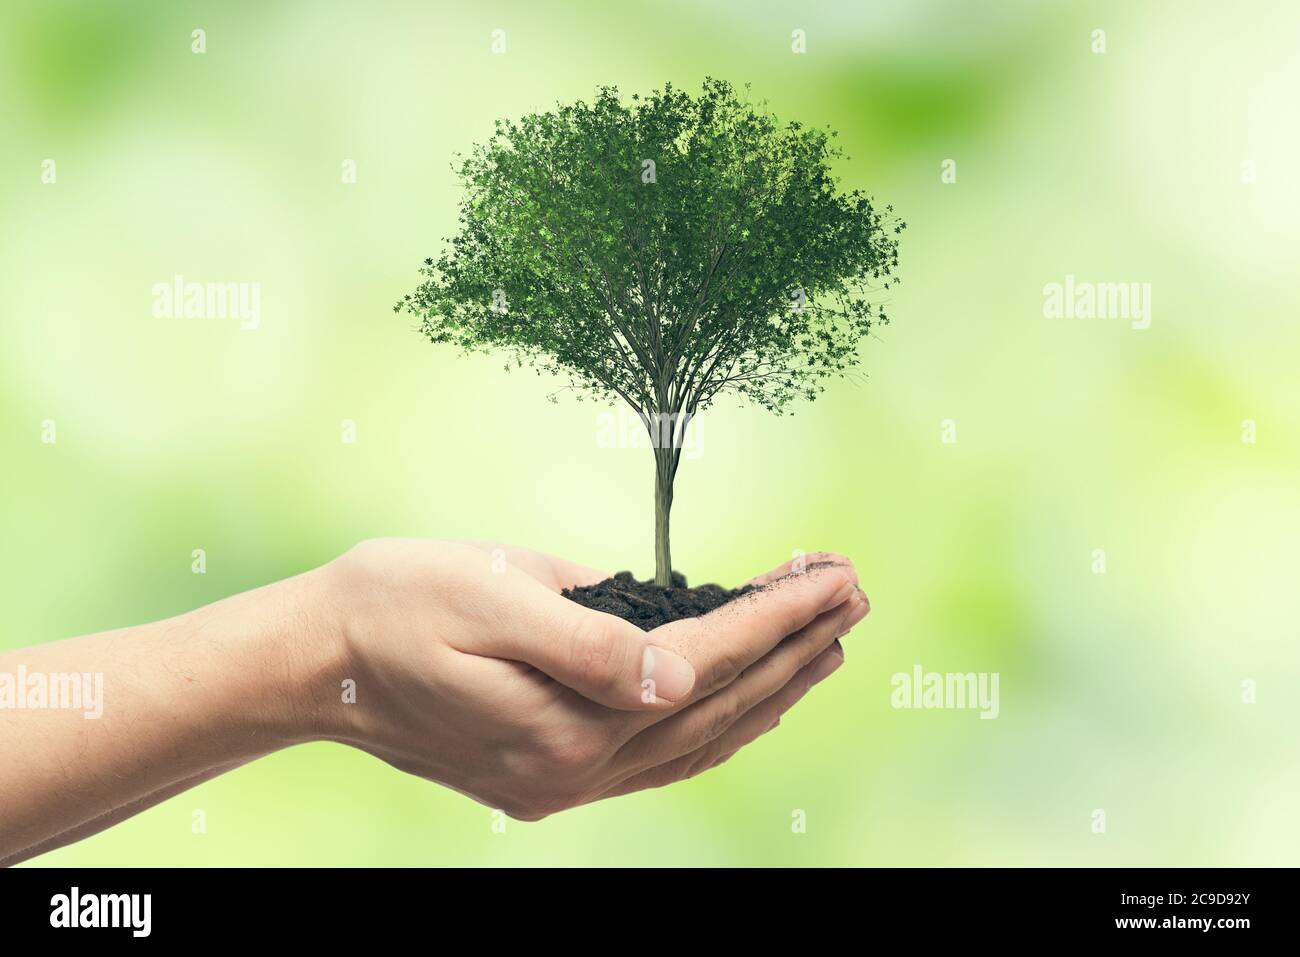 Human hand holding tree against blurred natural background. Save nature, ecology, Earth day concept. Stock Photo